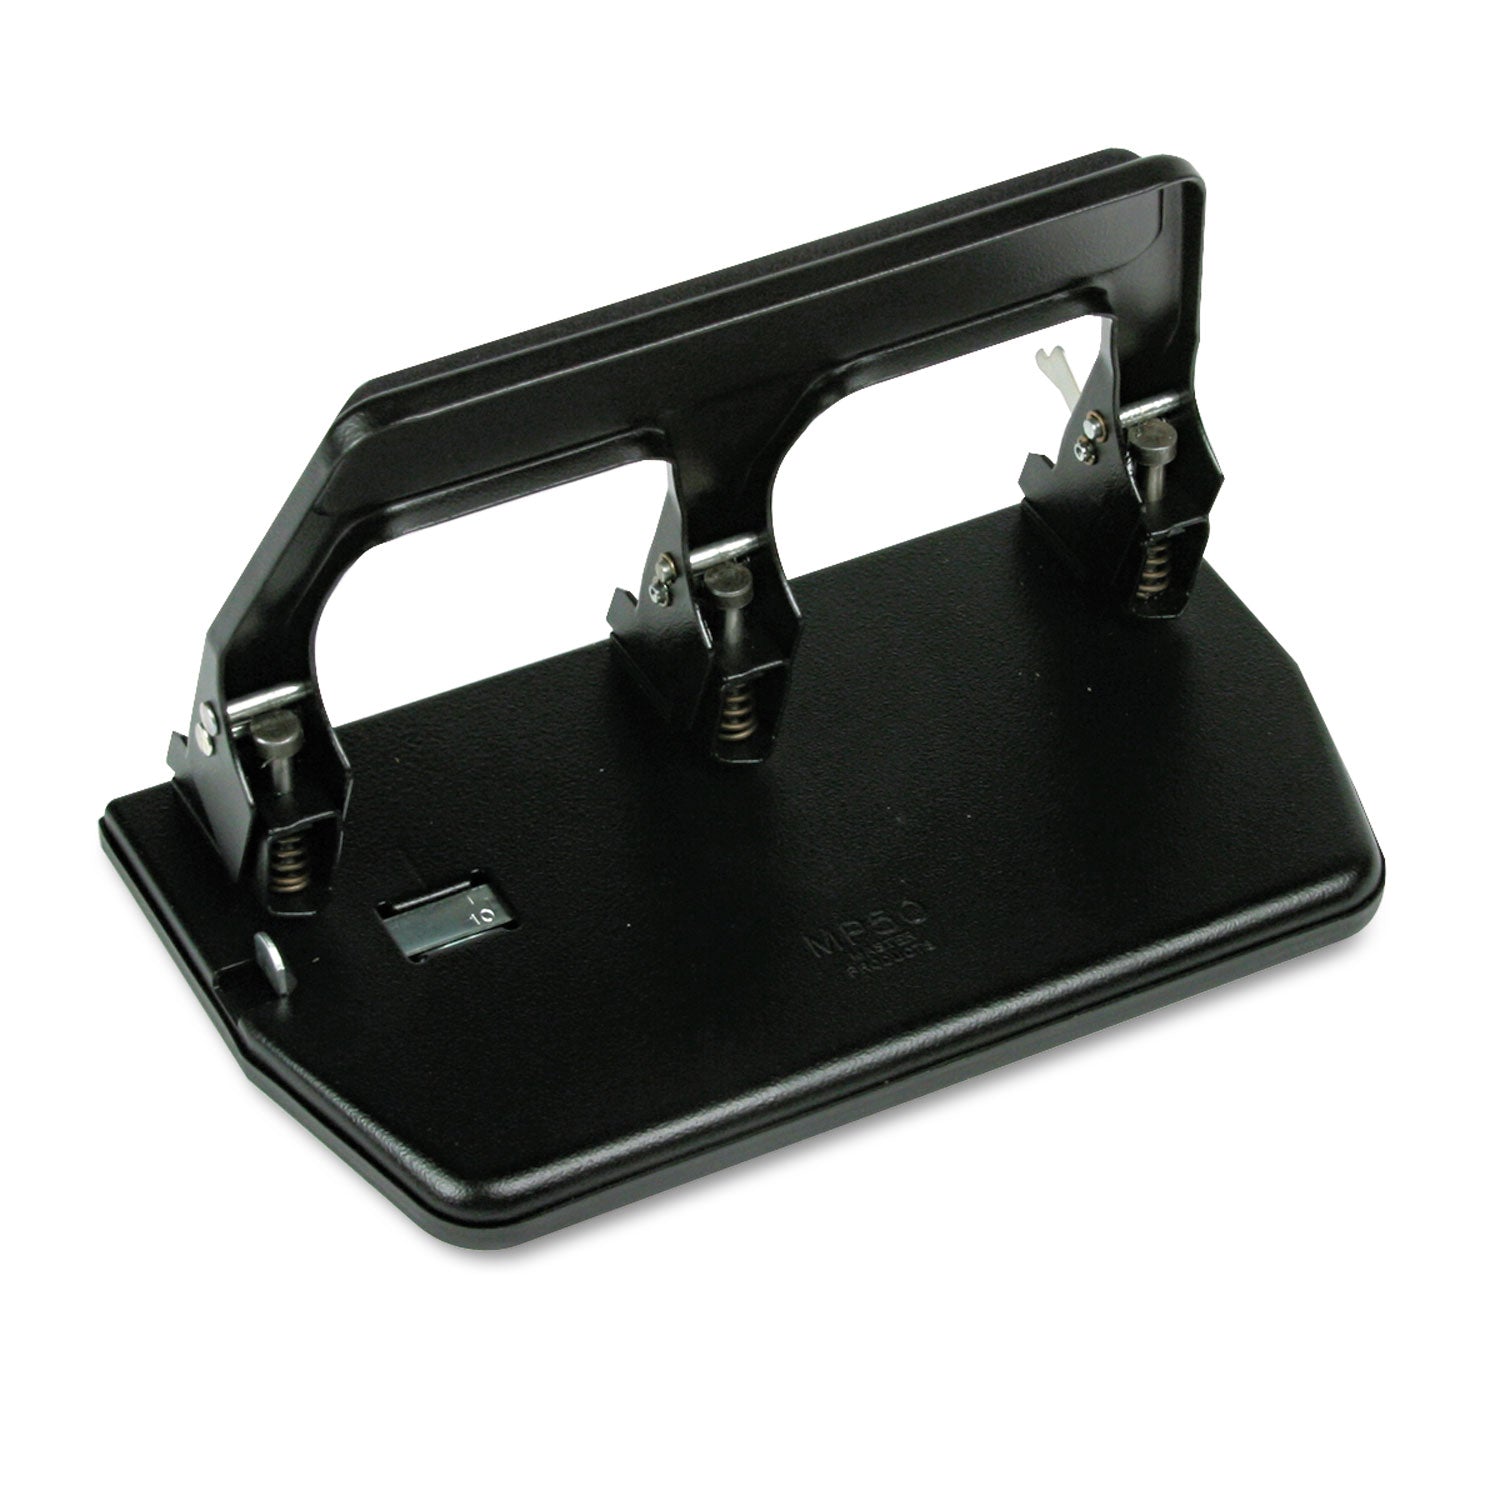 40-Sheet Heavy-Duty Three-Hole Punch with Gel Padded Handle, 9/32" Holes, Black - 